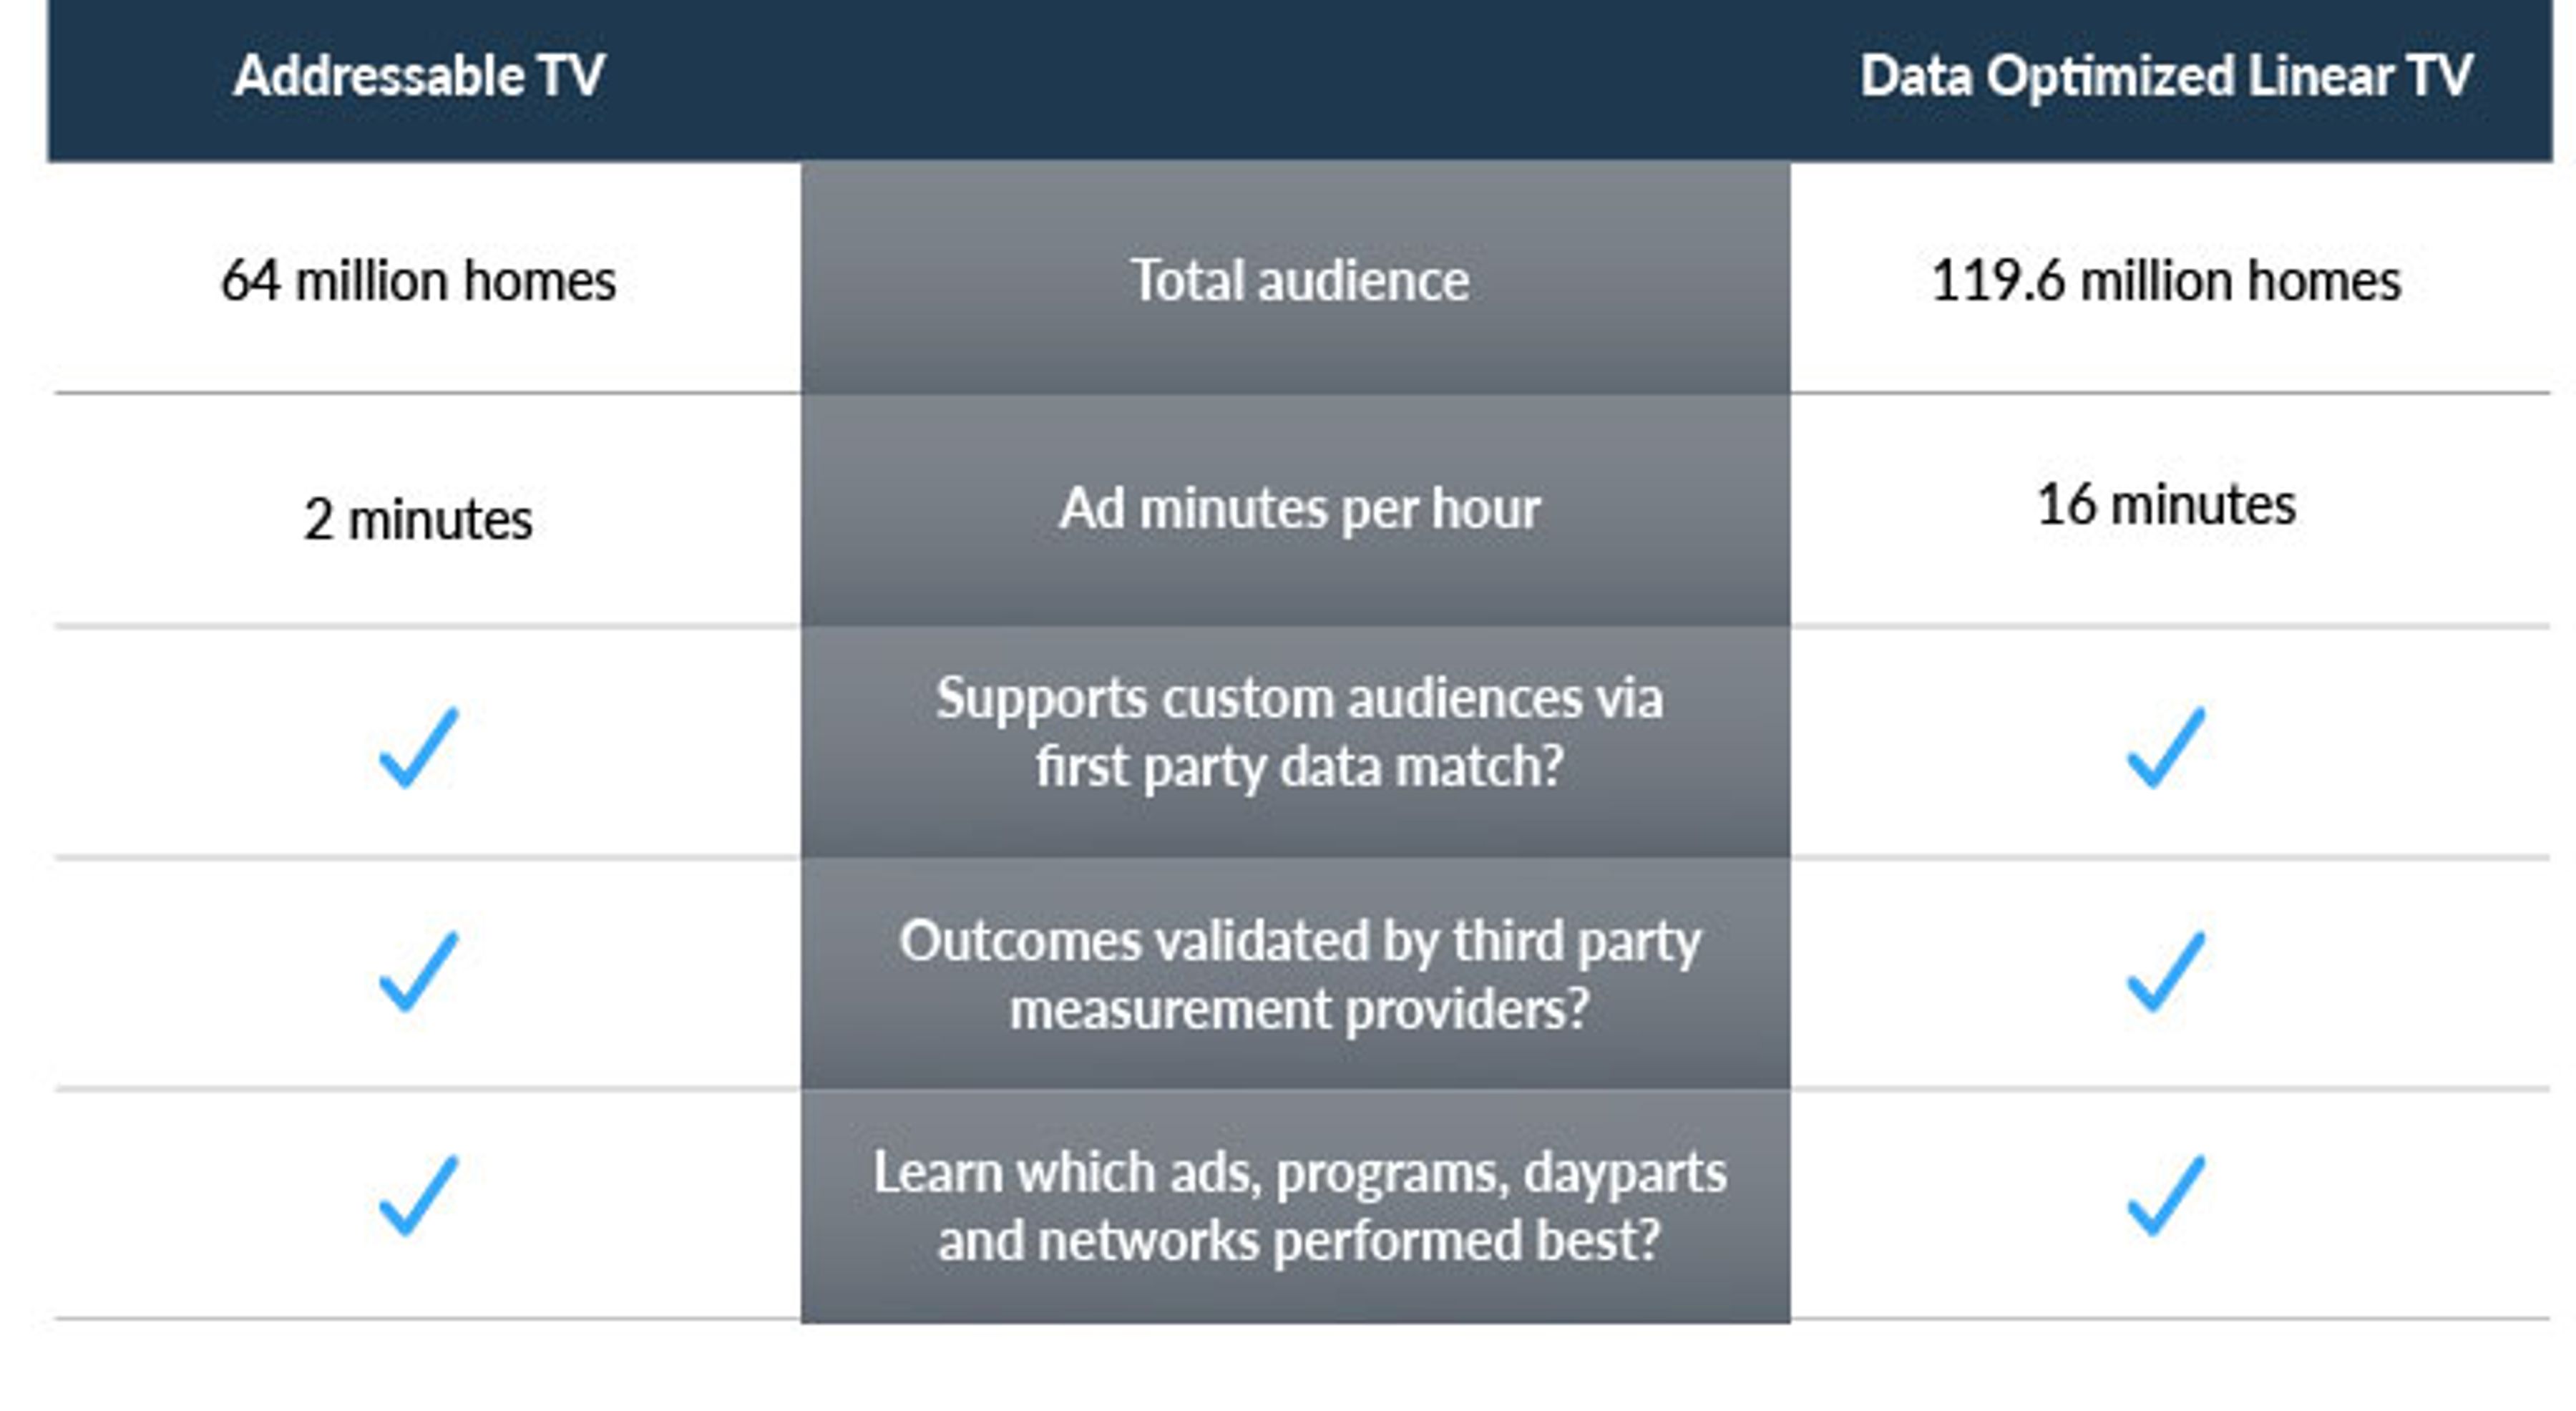 Table comparing addressable TV advertising and data-optimized linear TV advertising.